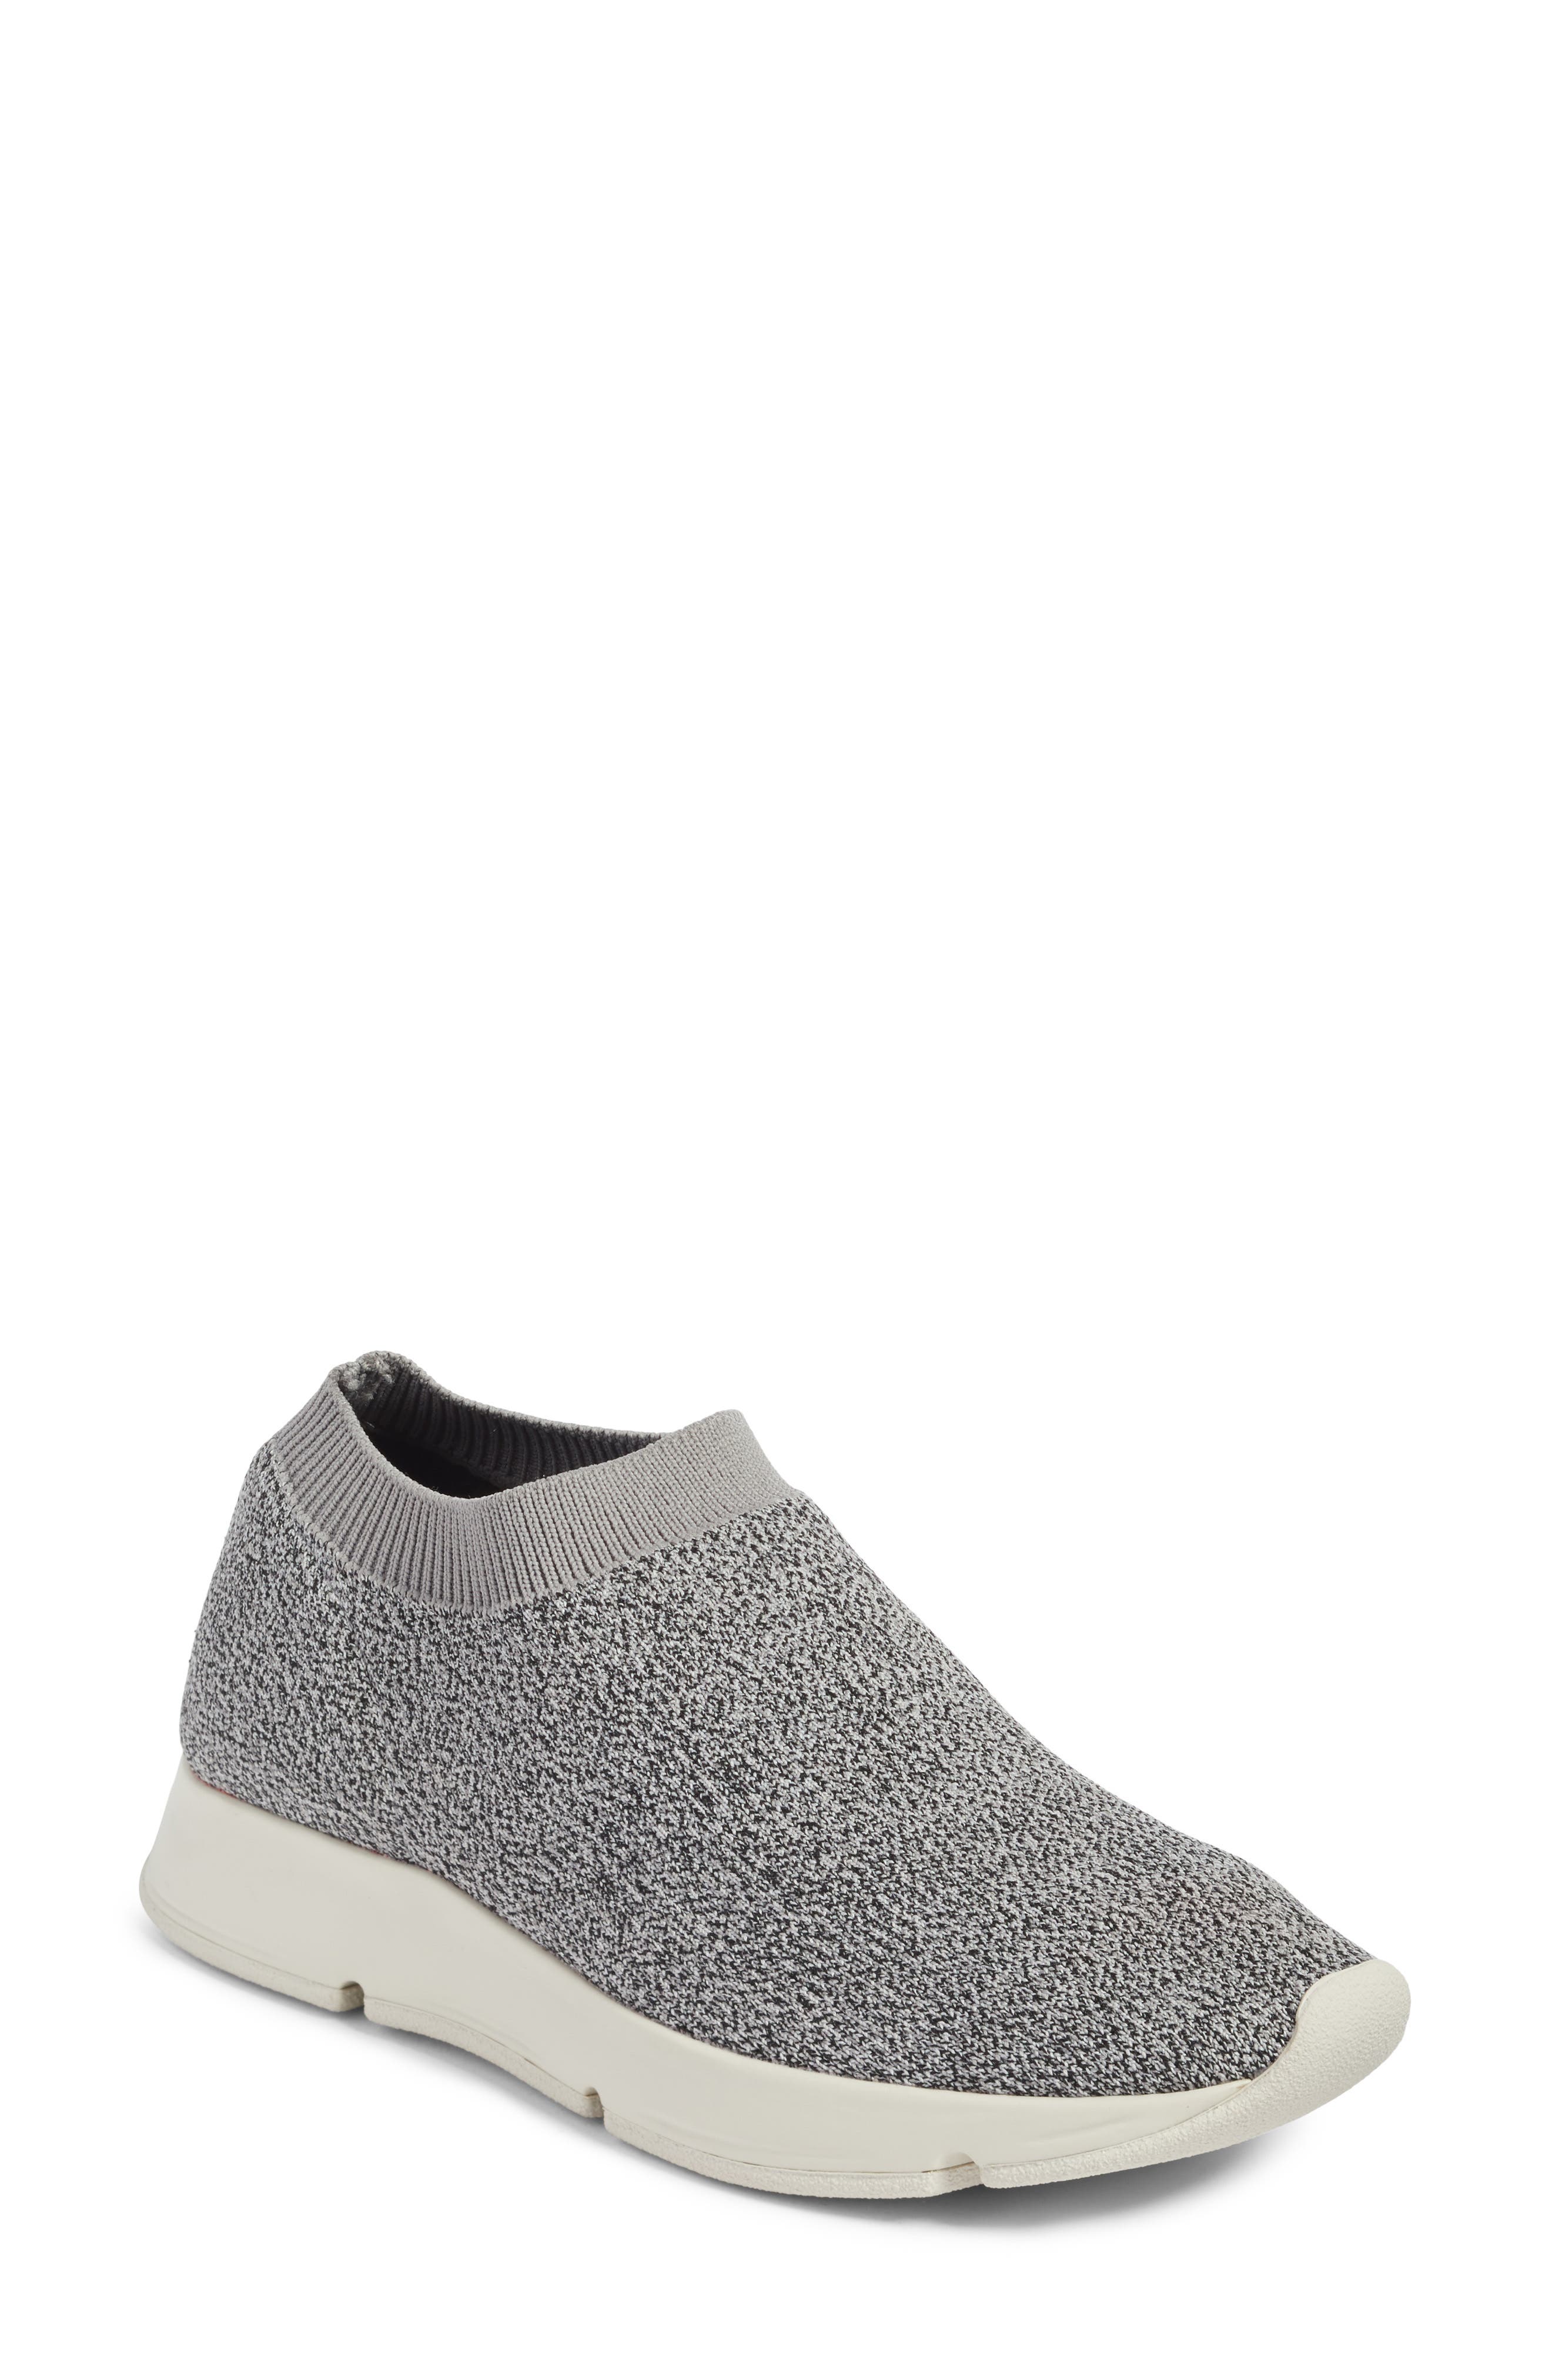 vince theroux knit sock sneakers